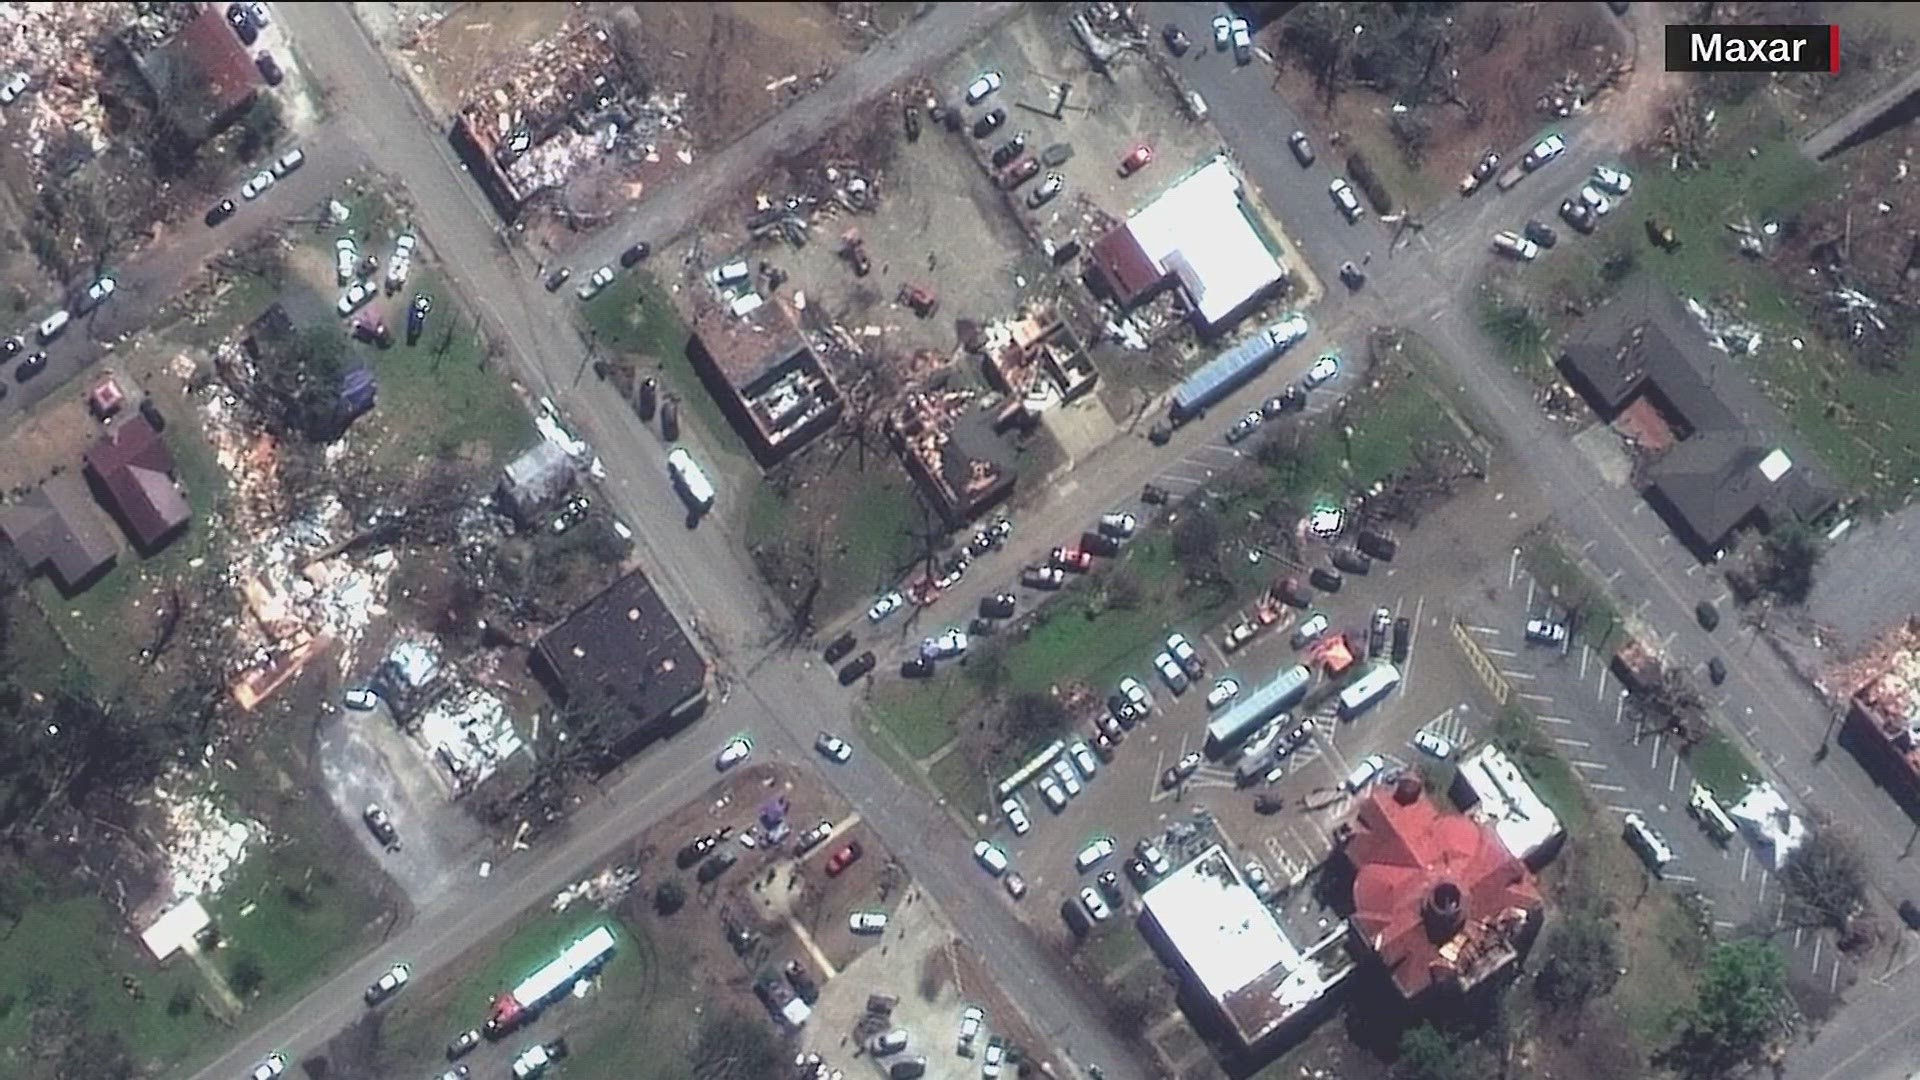 26 have been confirmed dead after the deadly tornado ripped through Mississippi.